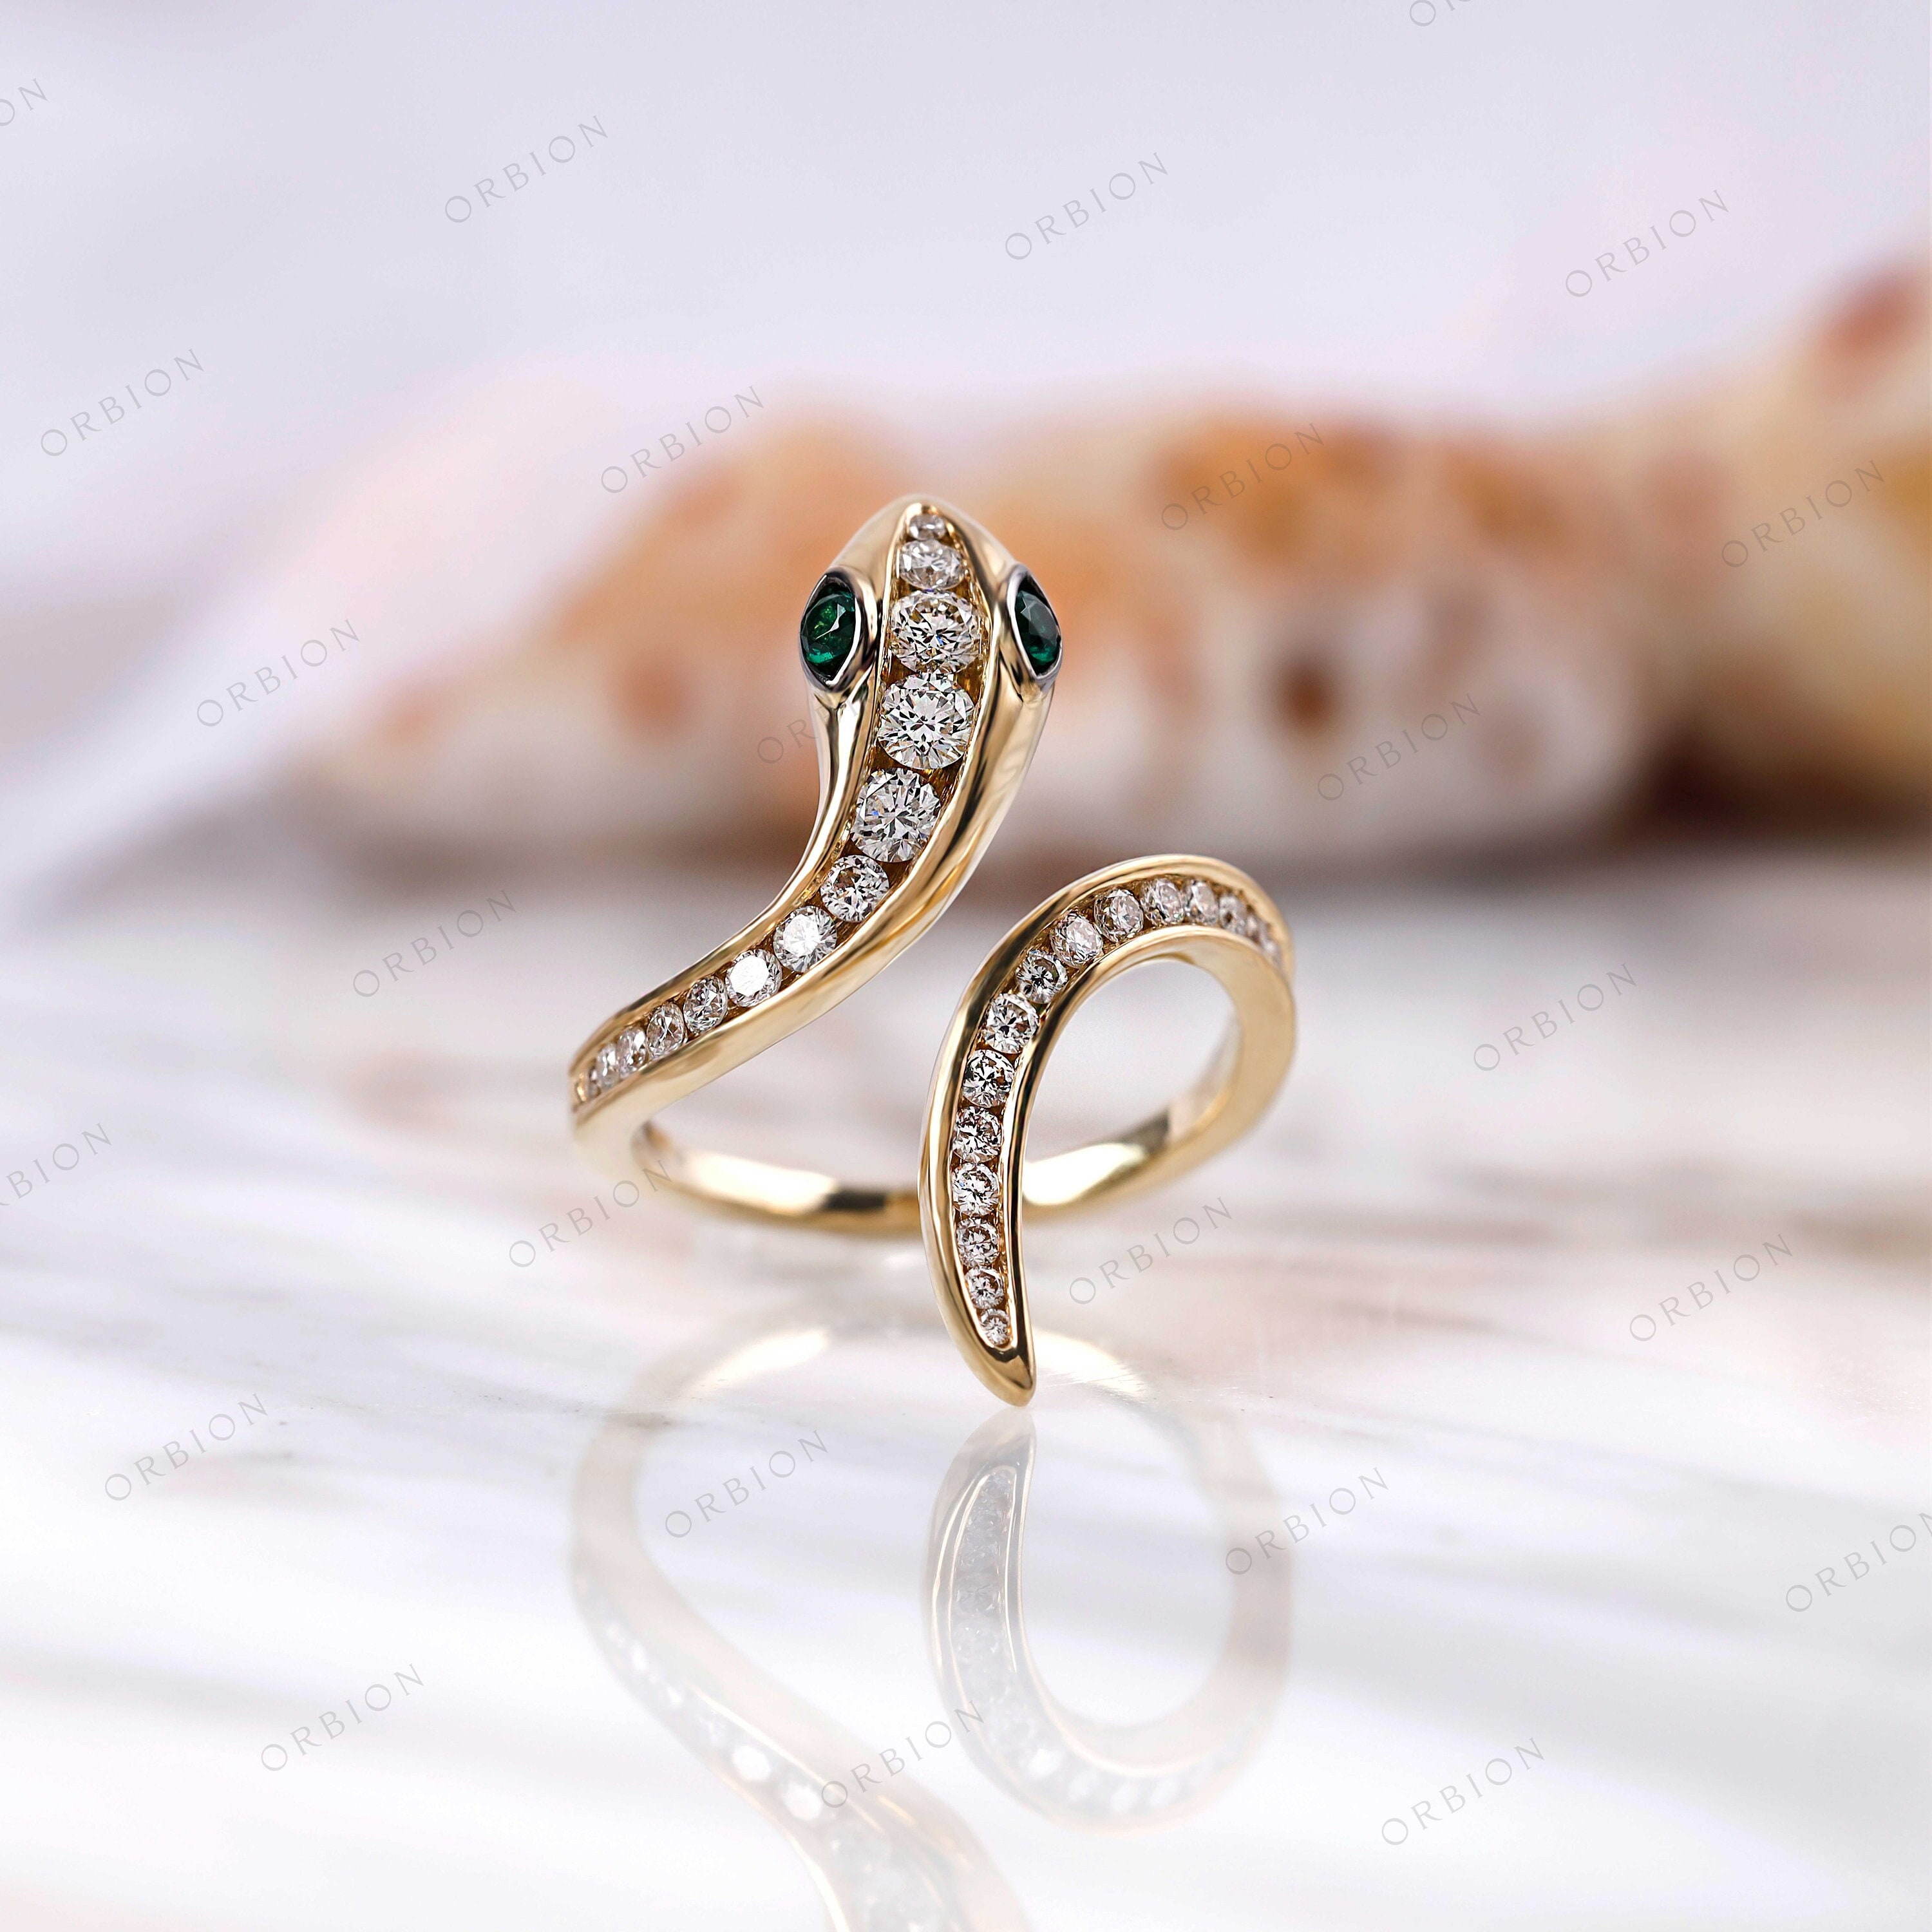 14kt Gold Round Diamond Accented Snake Ring